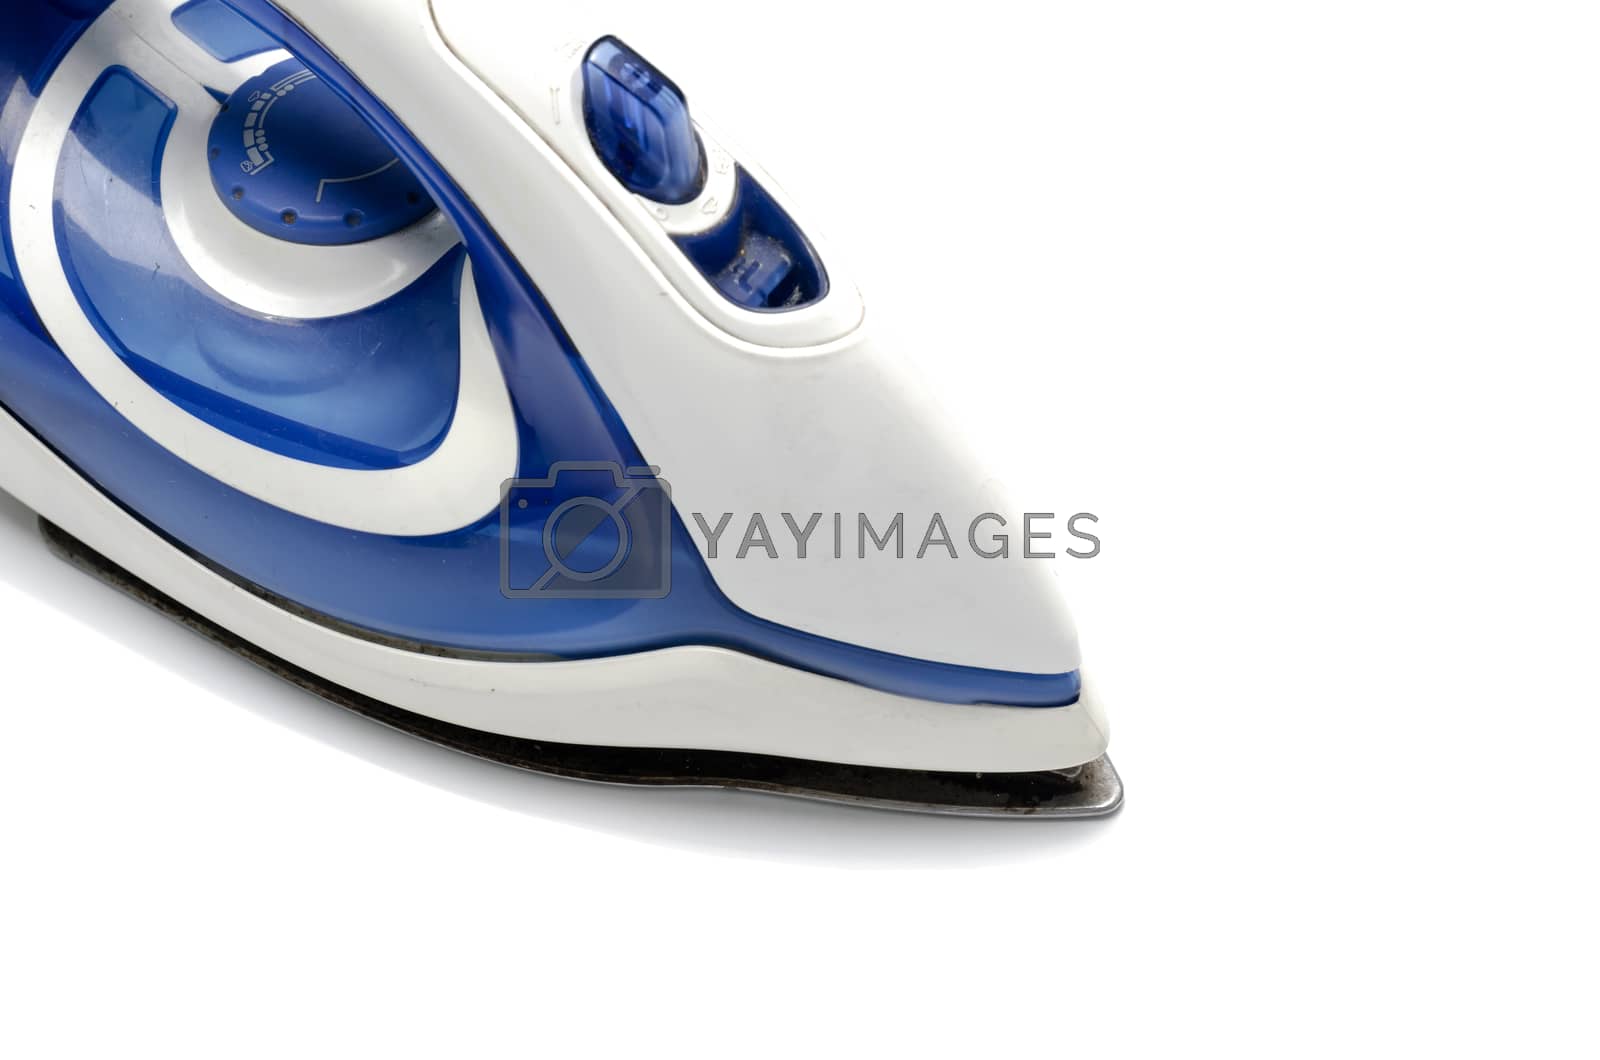 Royalty free image of electric iron by ammza12